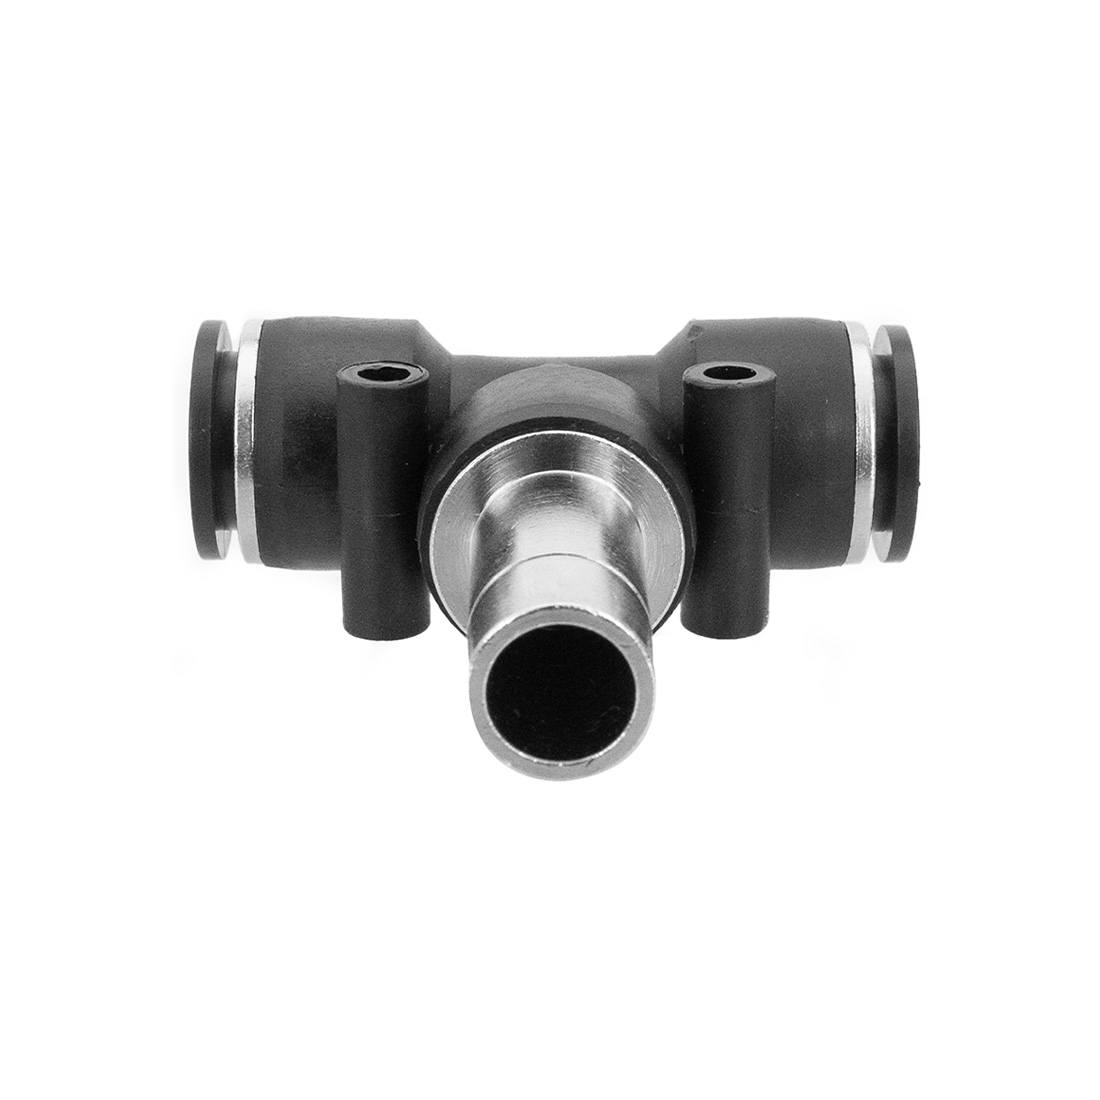 XERO Push-to-Fit T-Fitting with Stem - 1/2 Inch Base View